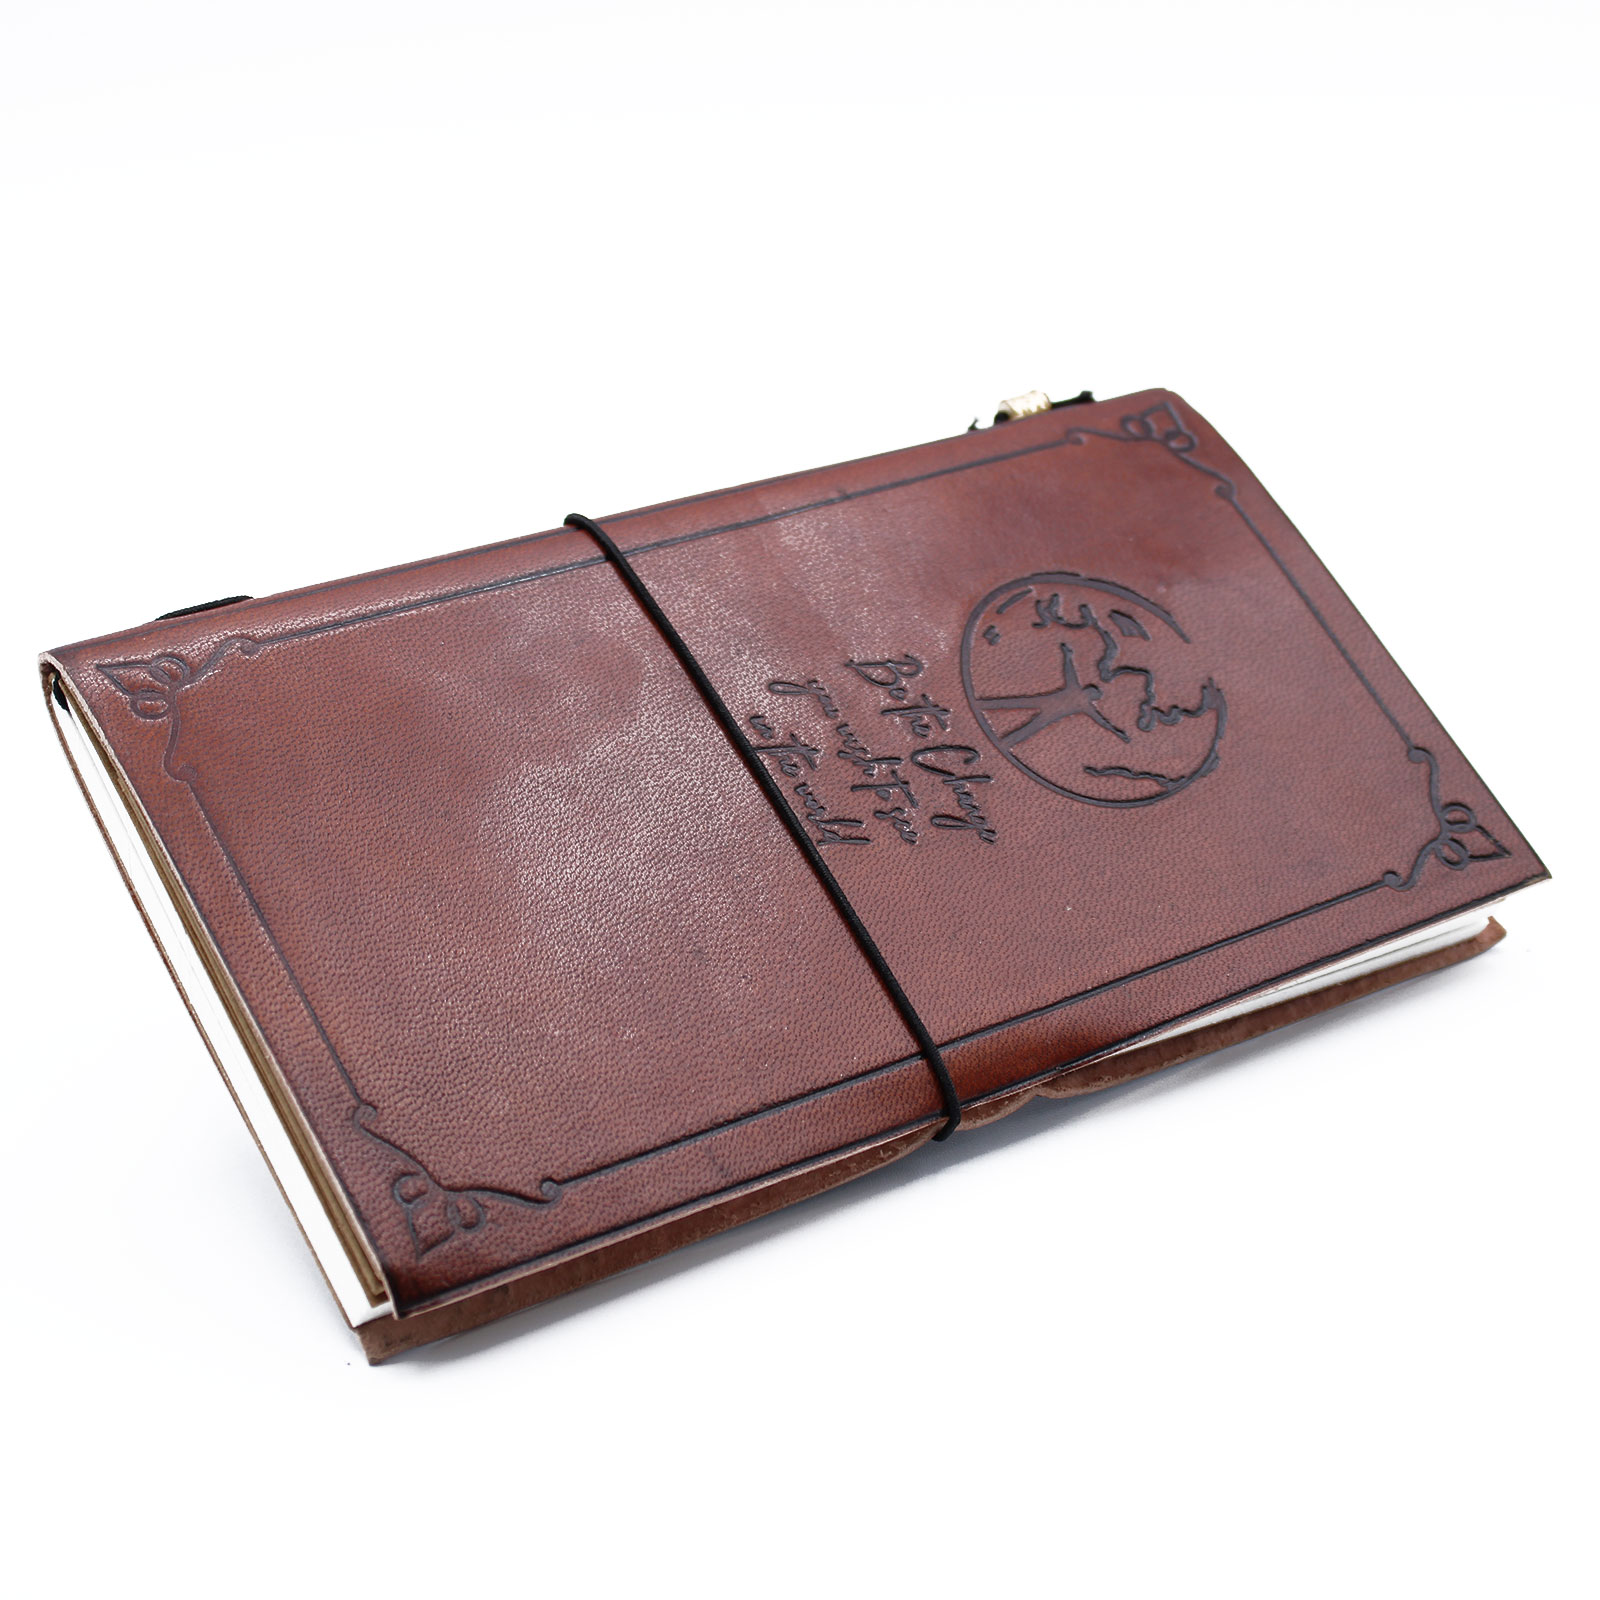 Handmade Leather Journal - Be the Change - Brown (80 pages) - MSJ-02